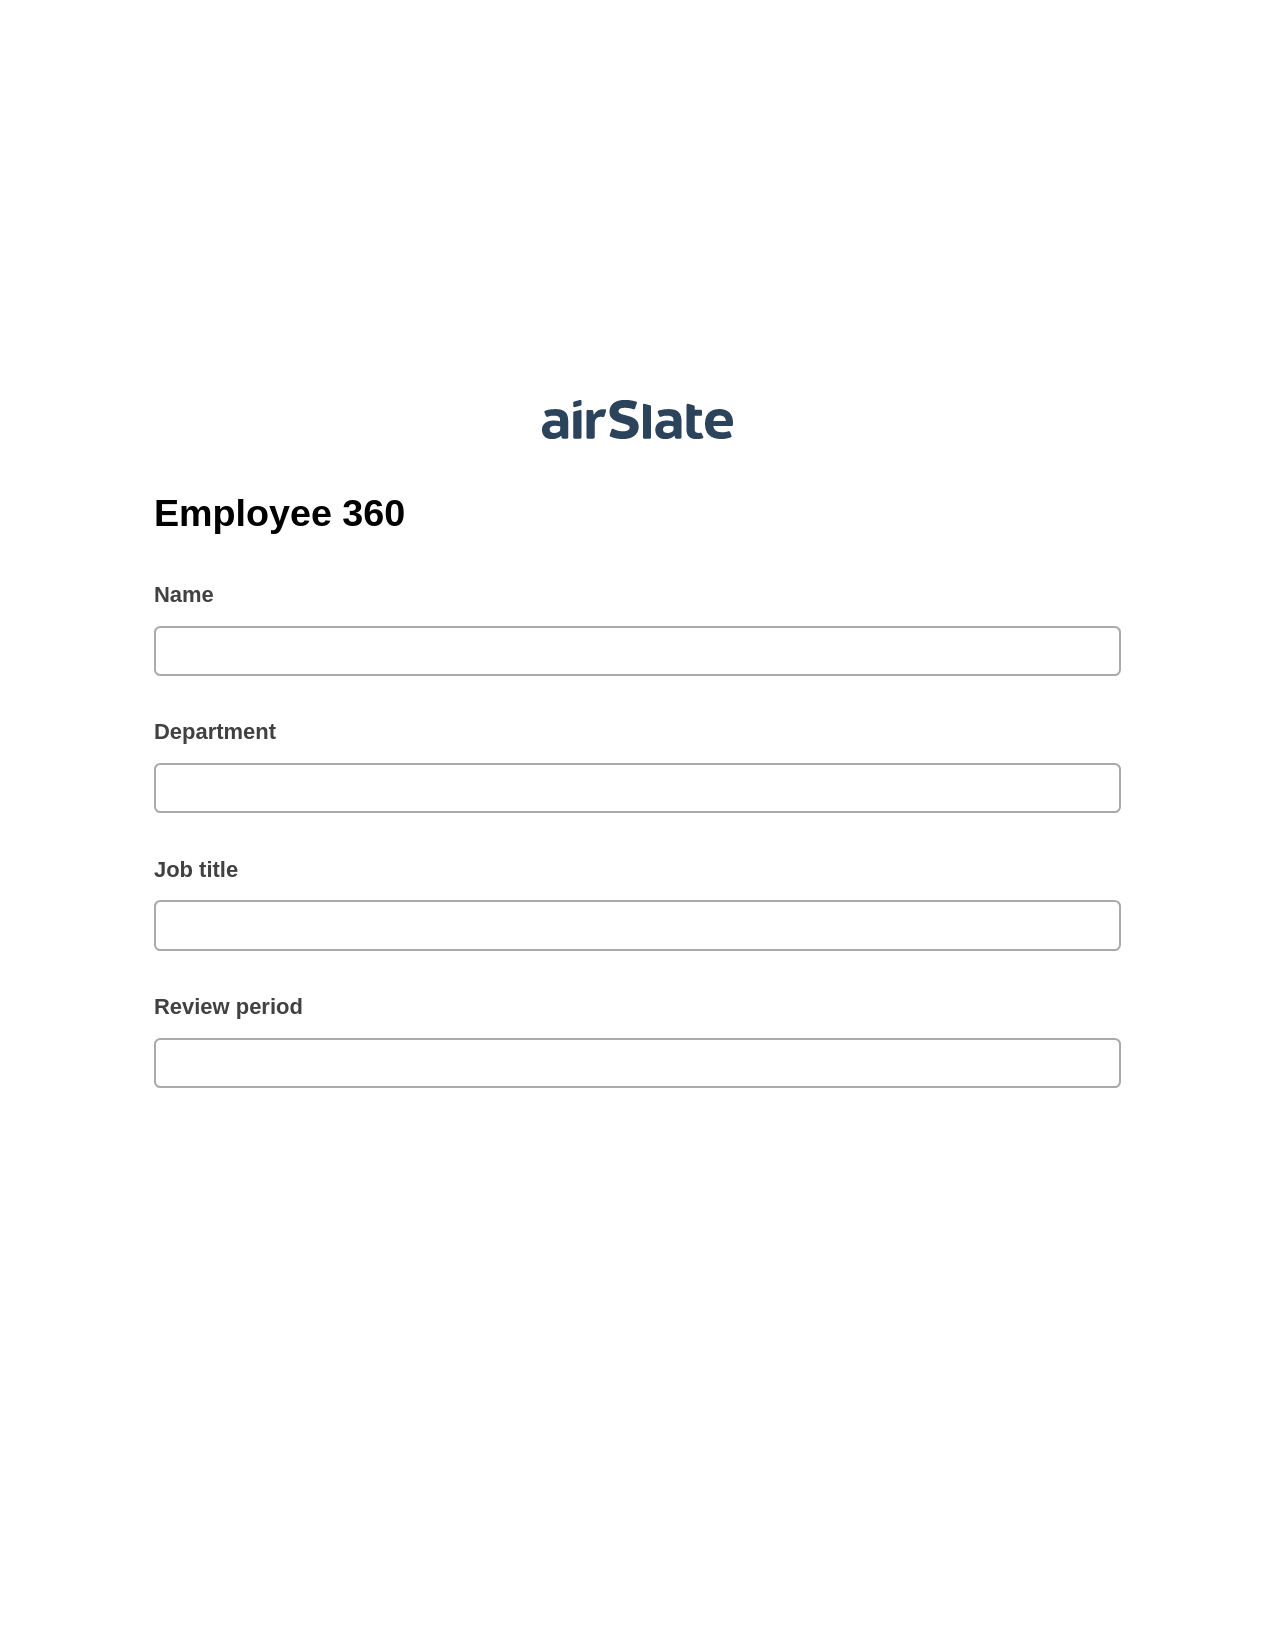 Employee 360 Pre-fill from CSV File Bot, Mailchimp add recipient to audience Bot, Export to NetSuite Bot